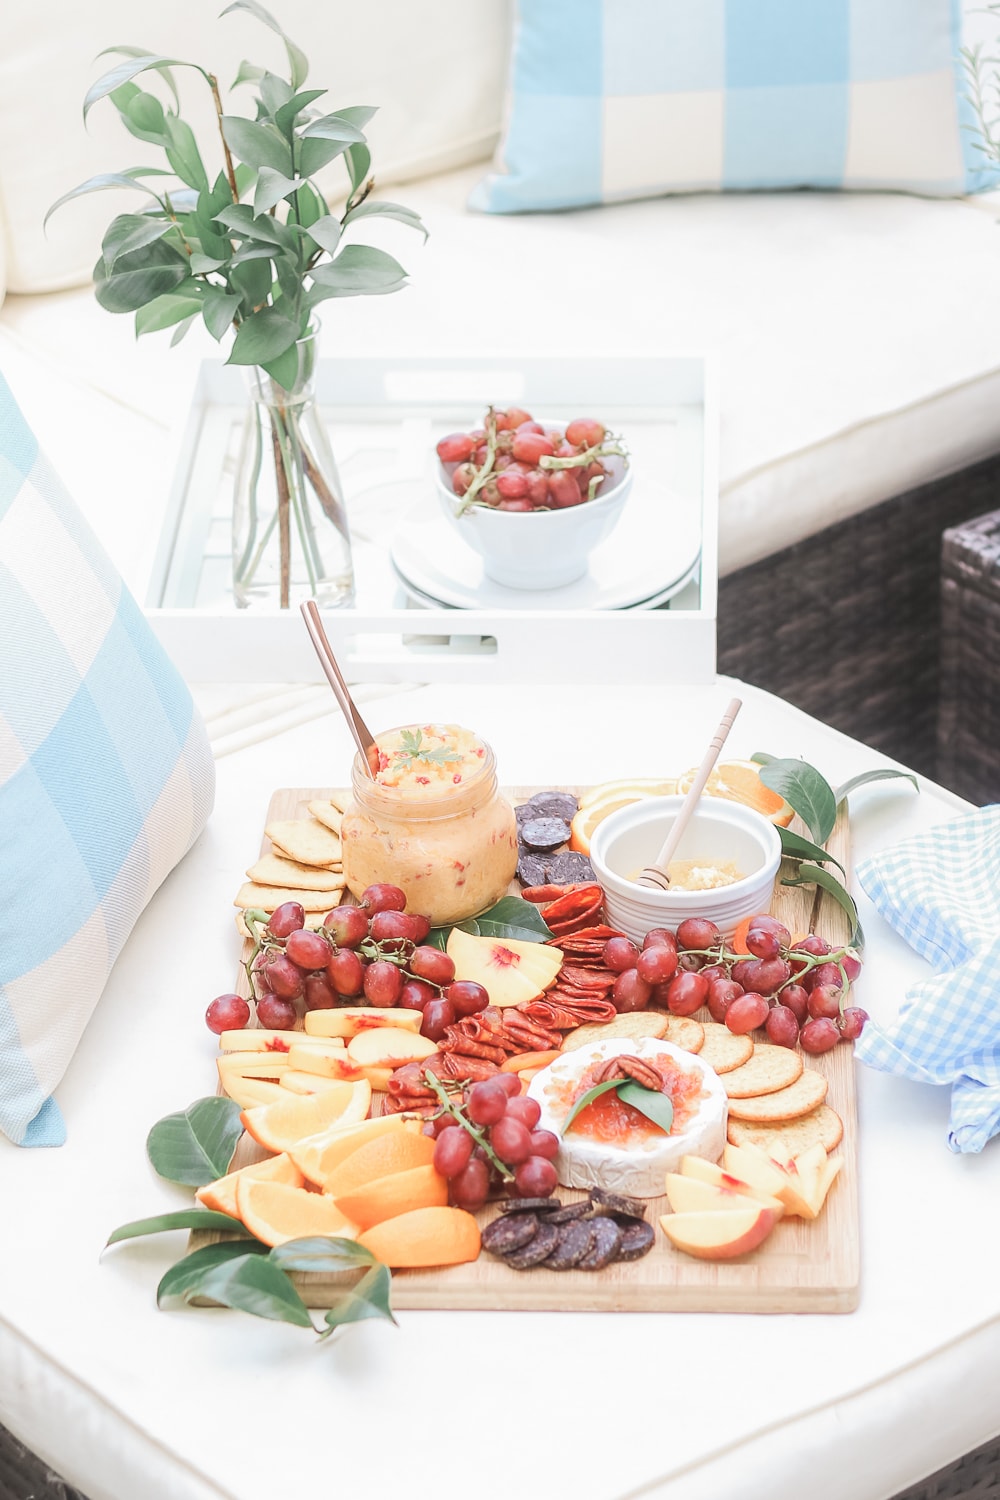 Southern-inspired beef charcuterie board designed by southern lifestyle blogger Stephanie Ziajka on Diary of a Debutante